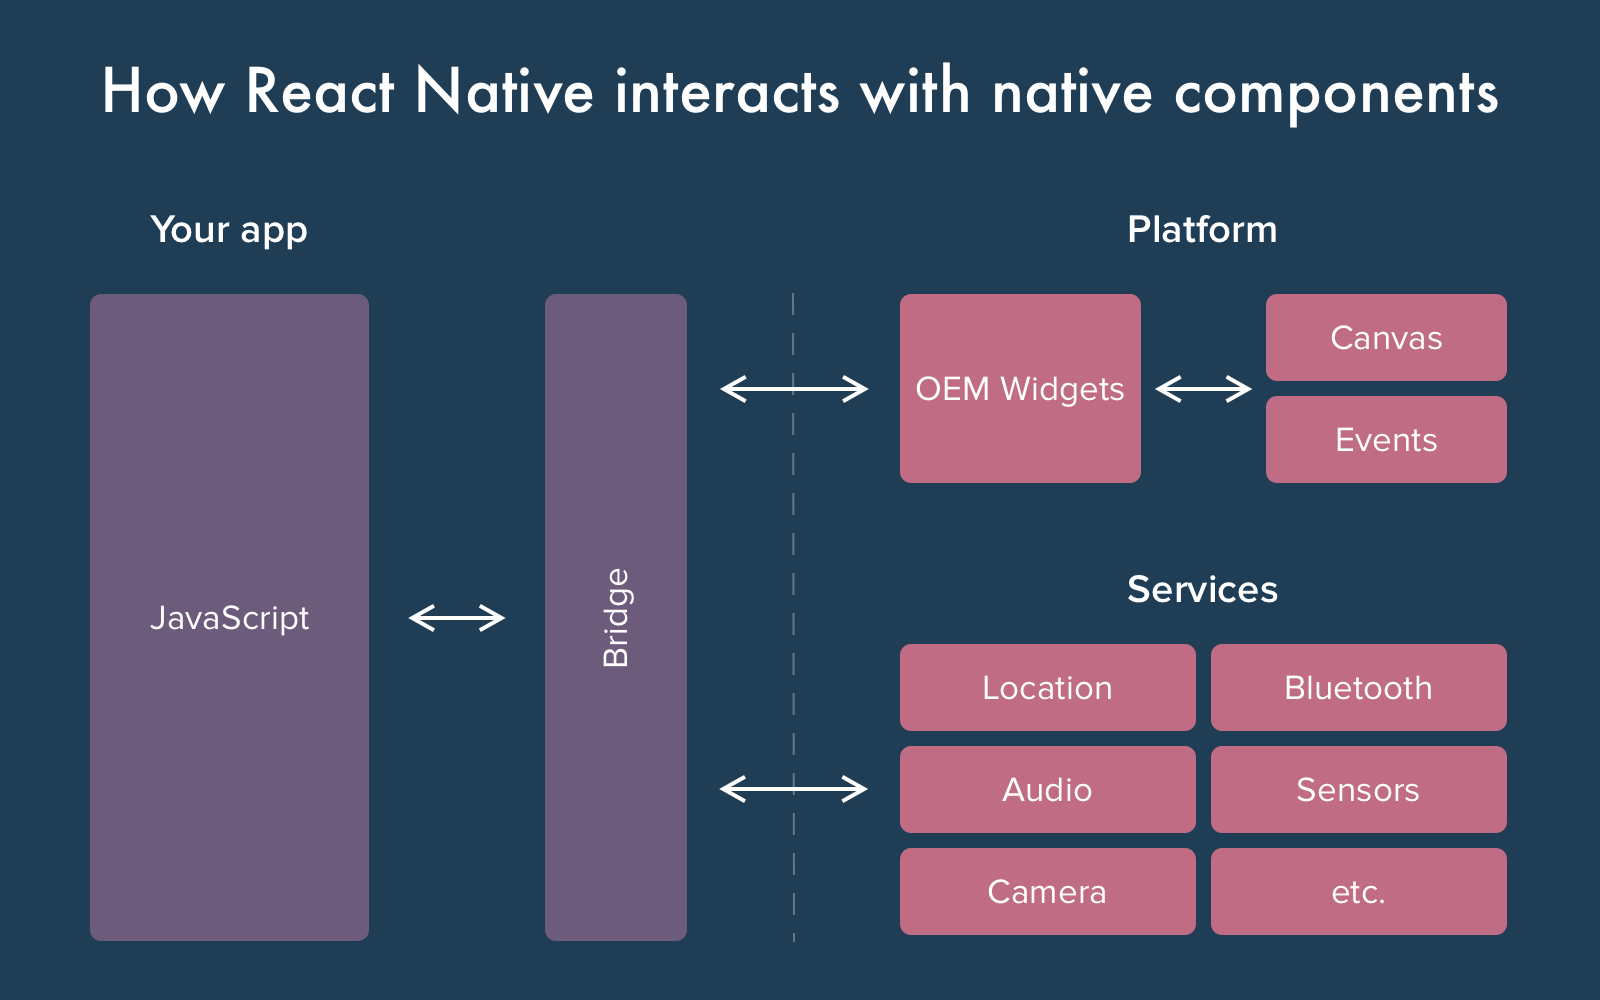 flutter-vs-react-native-comparing-the-features-of-each-framework 캡쳐 / React Native